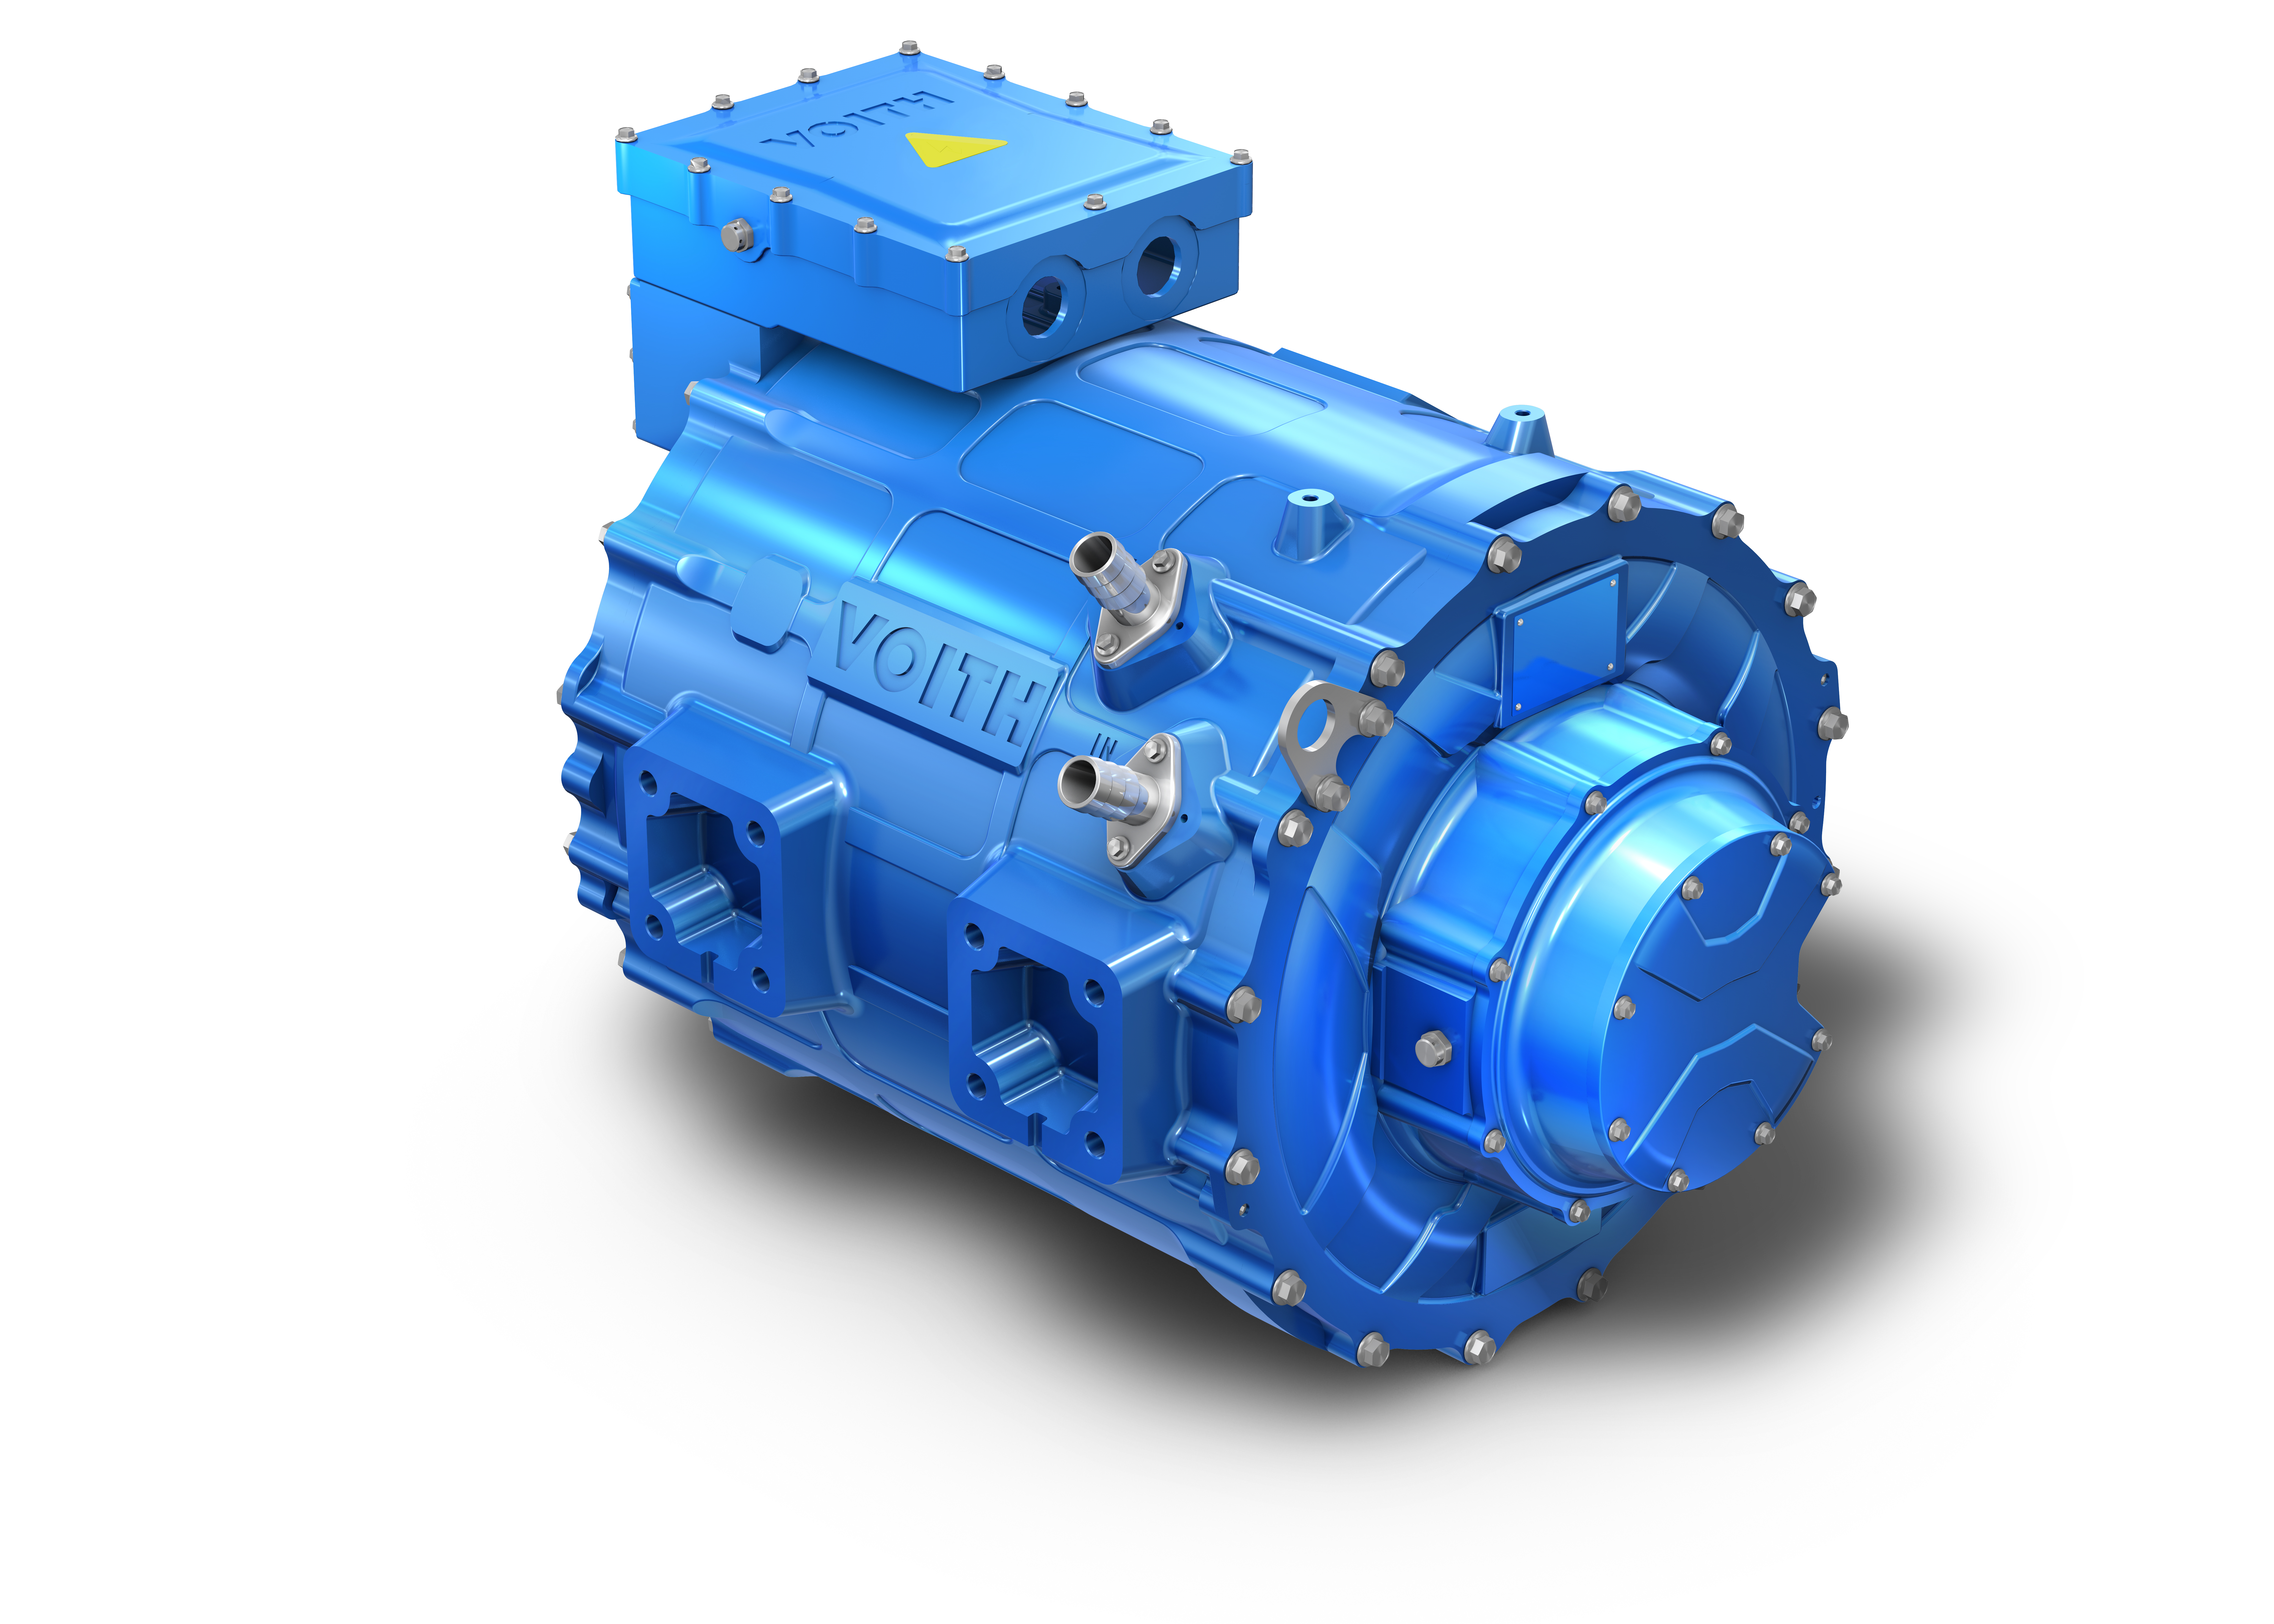 HD motor of Voith Electrical Drive System (VEDS) with 310 kW continuous power and 410 kW peak power.